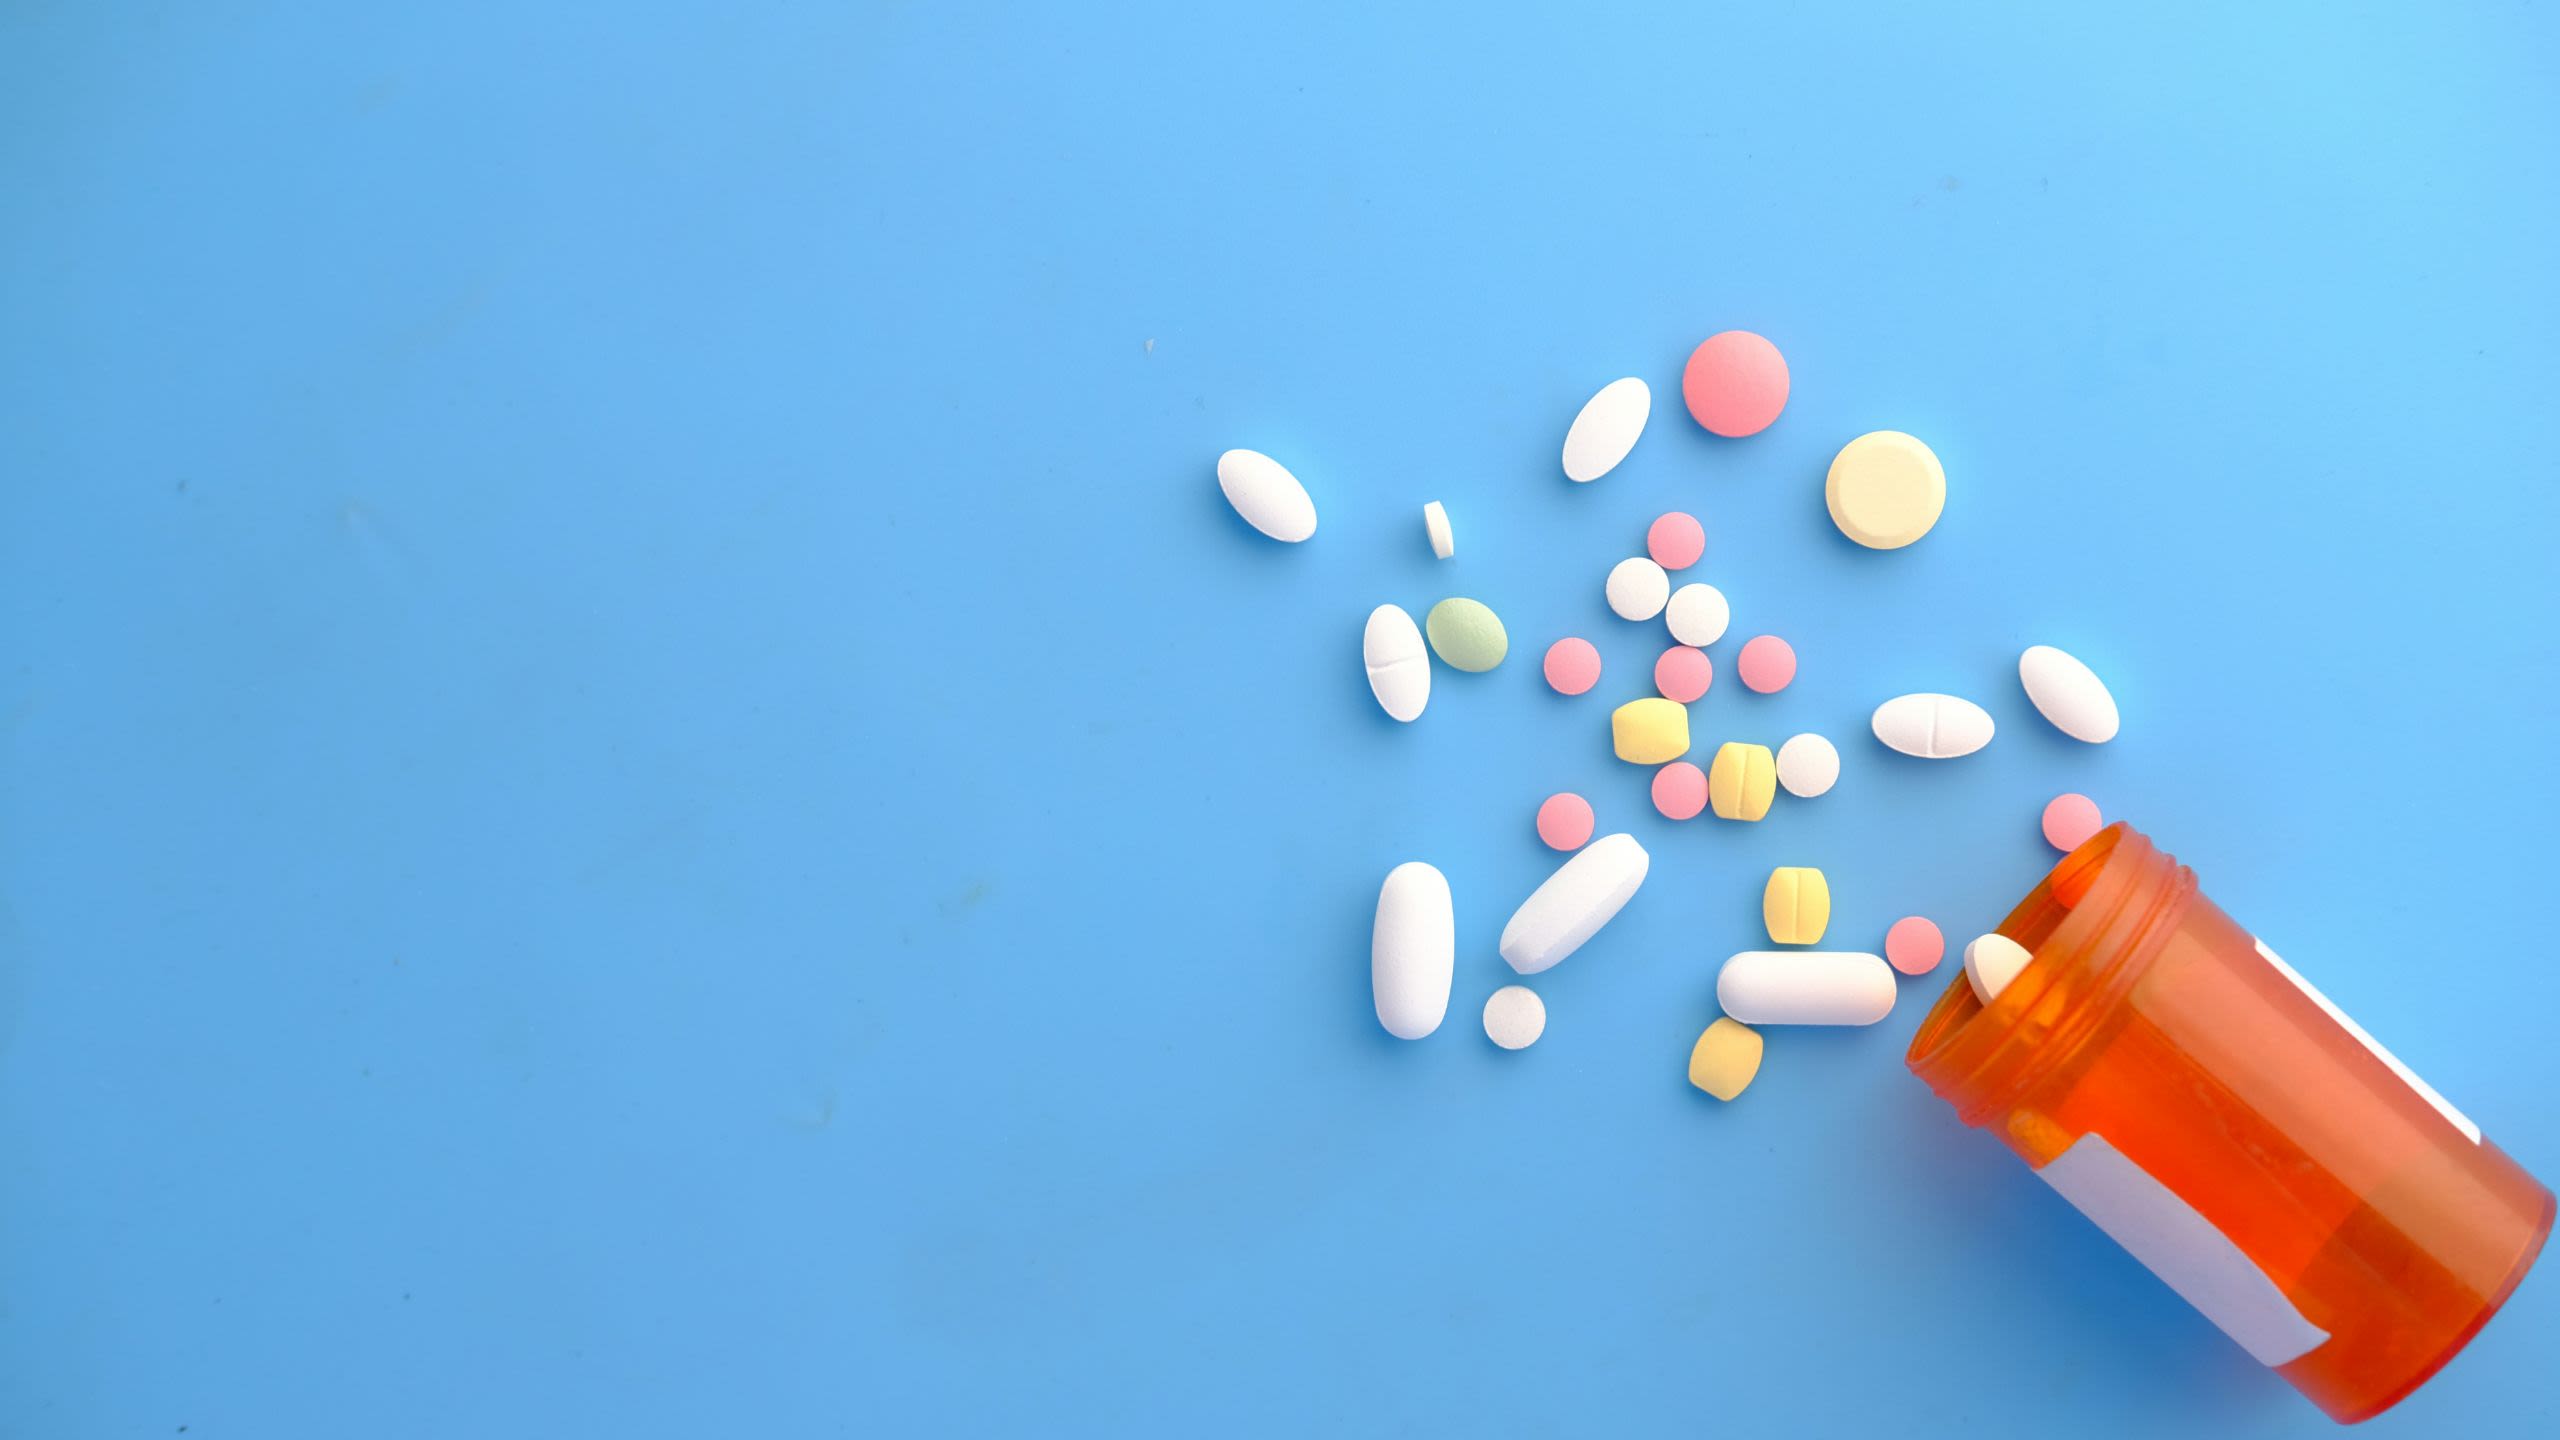 Pills spilling out of a plastic tub on a bright blue background